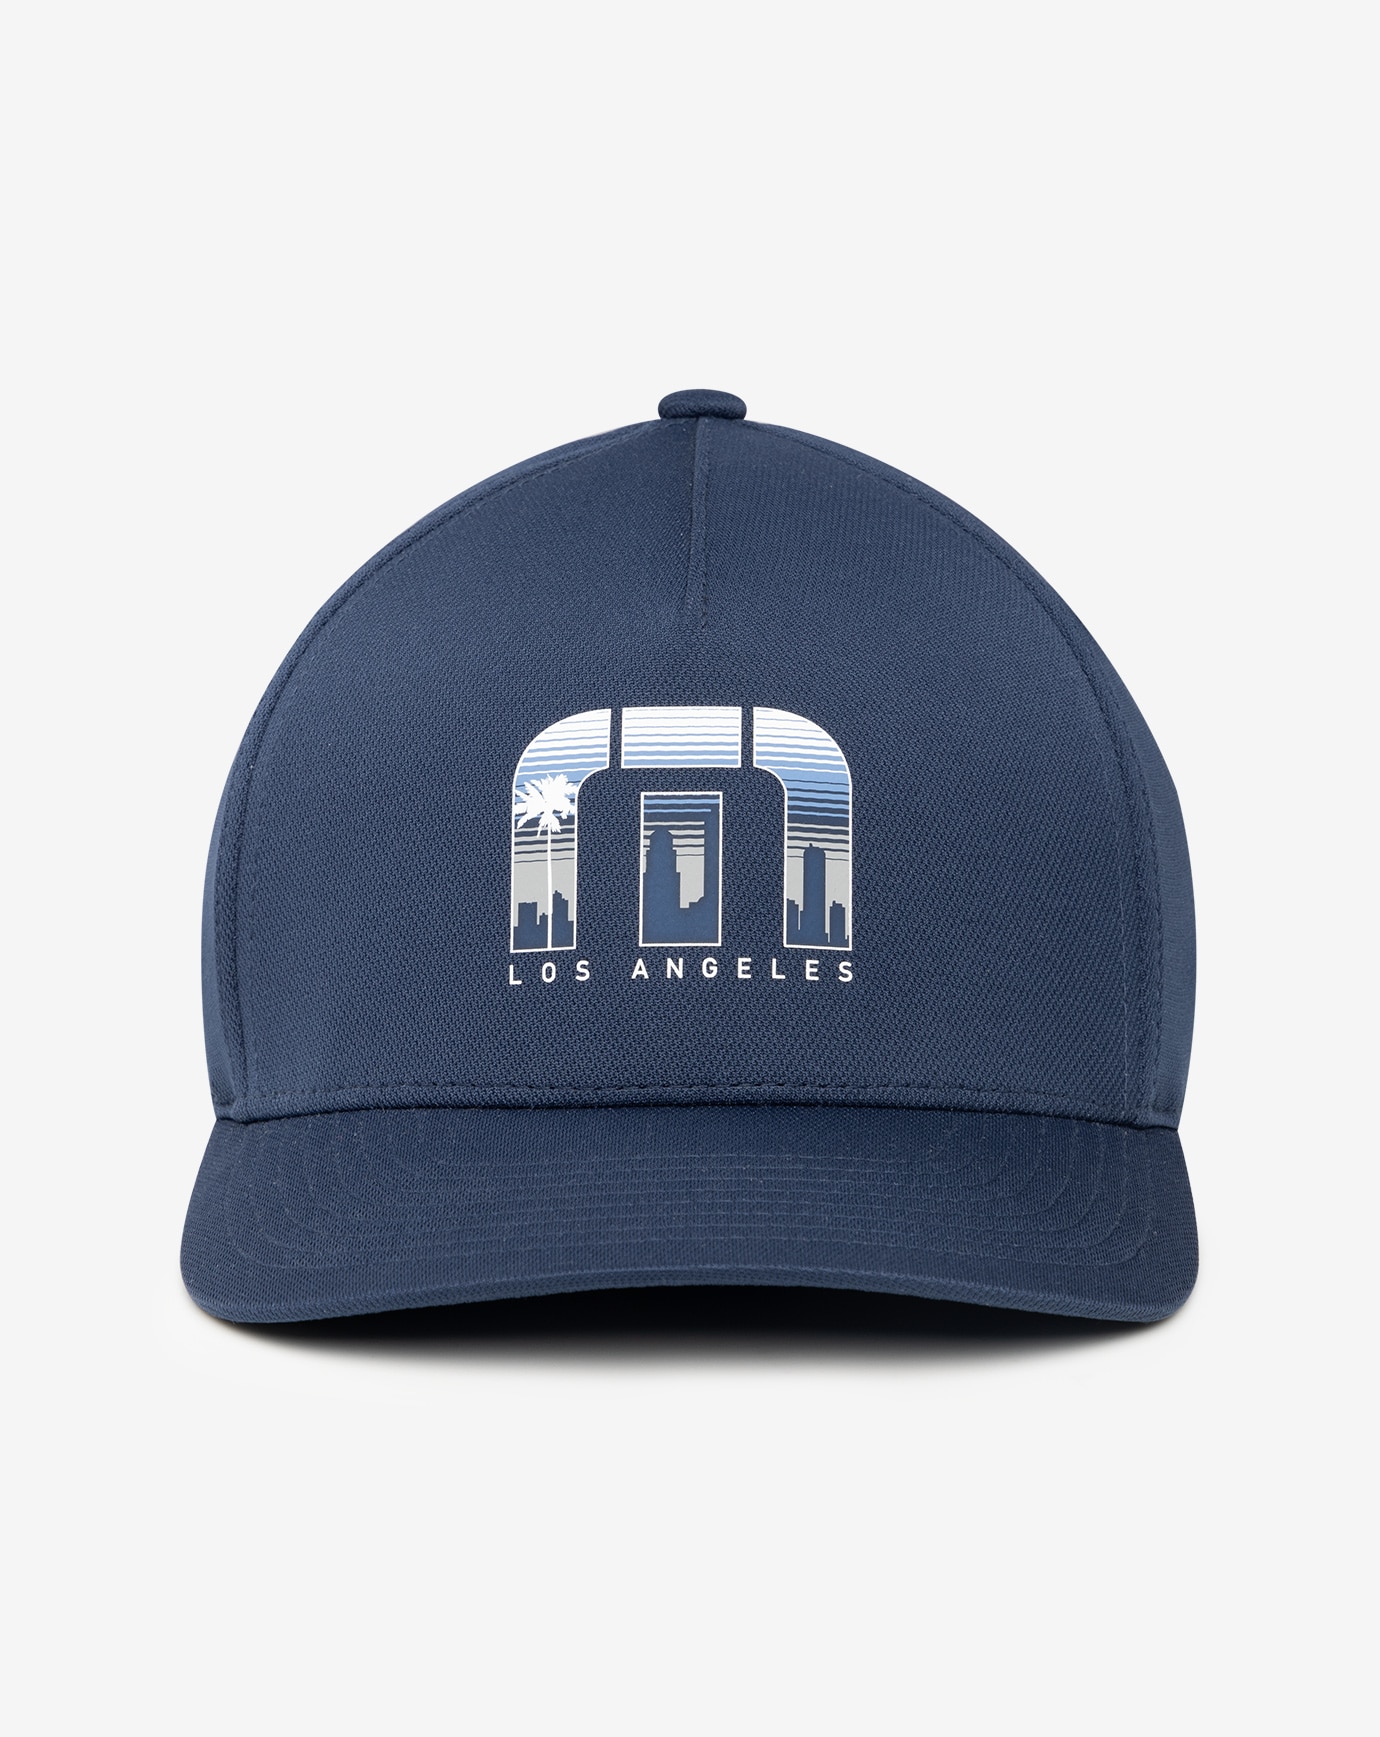 ECHO PARK FITTED HAT Image Thumbnail 1